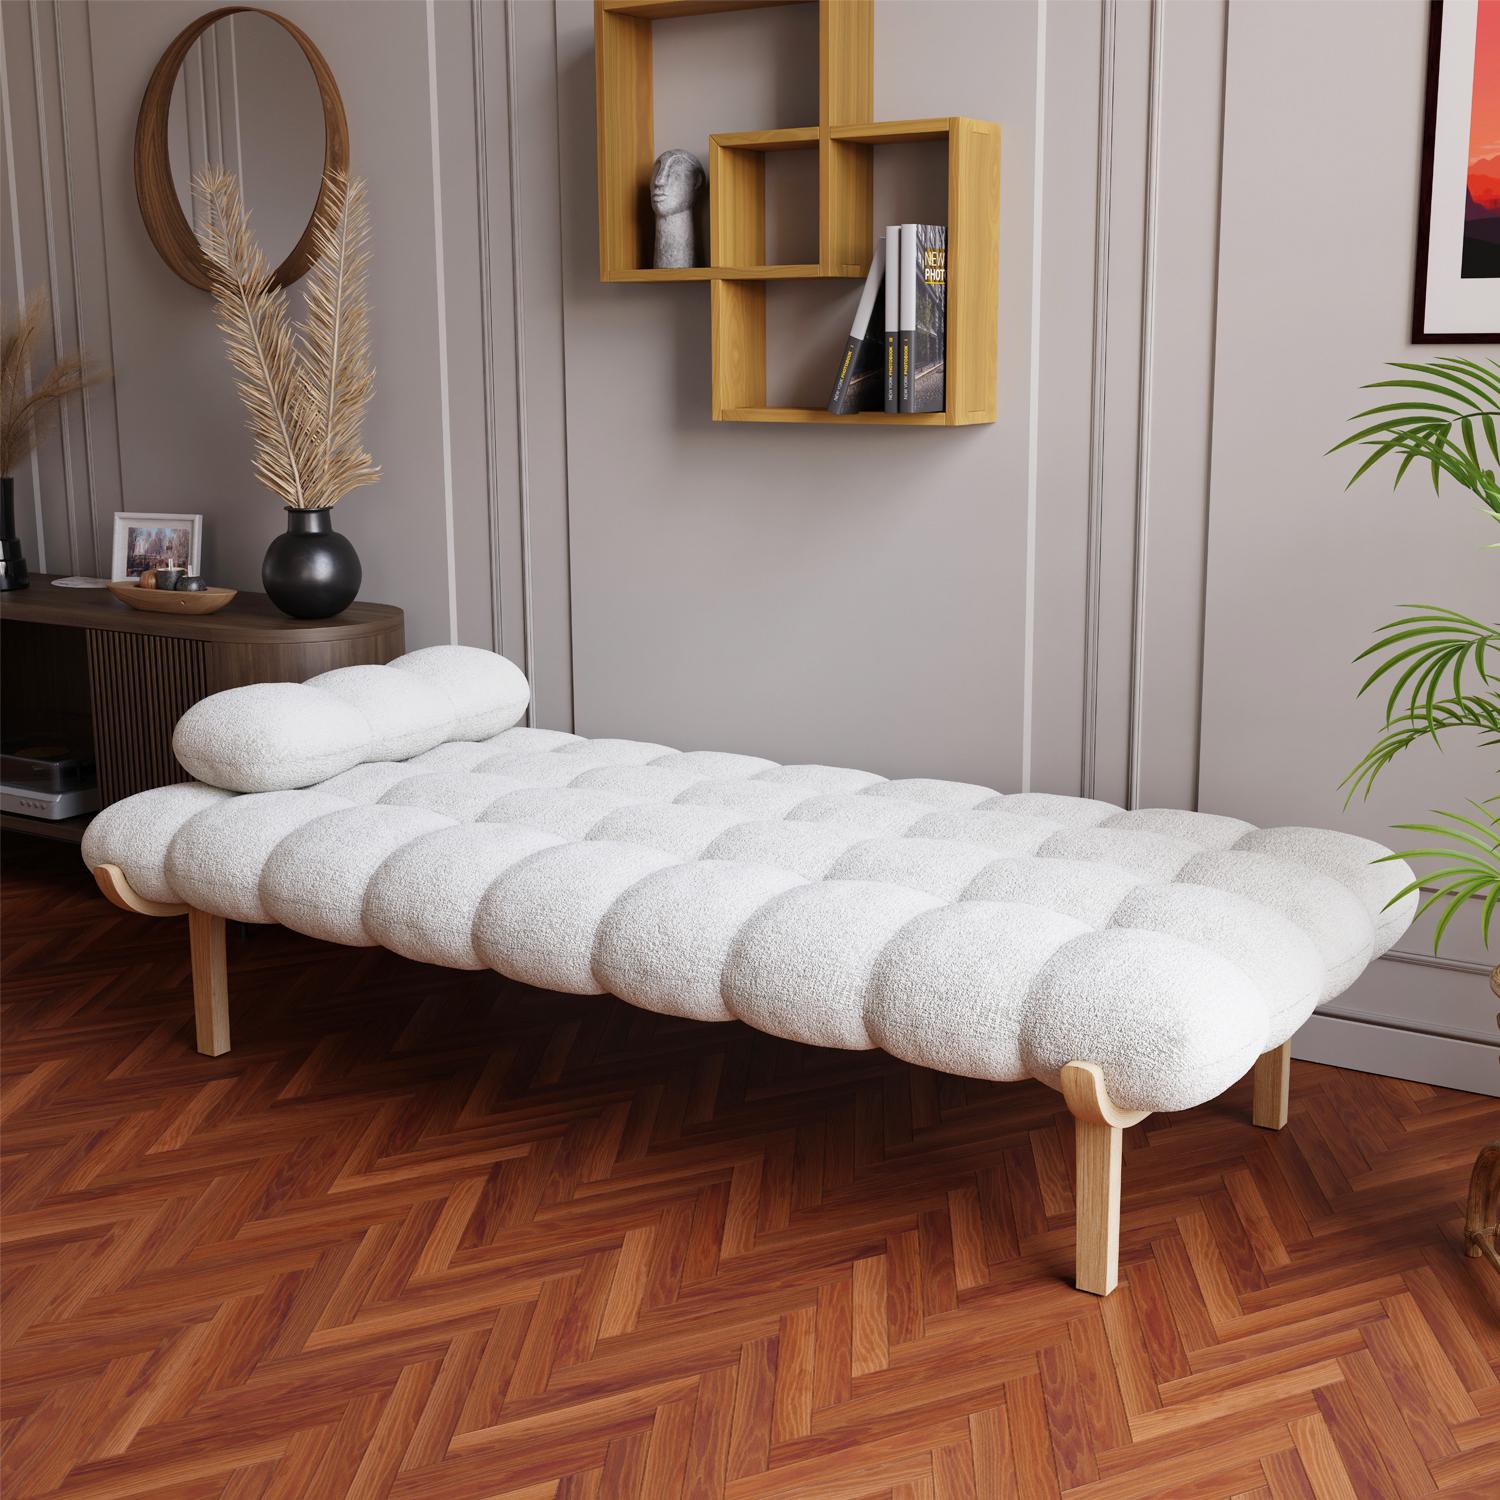 Daybed Cloudy with solid birch wood structure in oak 
matt varnished finish. Upholstered and covered with white 
bouclé cream fabric. Cushion included.
Also available with other fabric bouclé cream colors, on request.